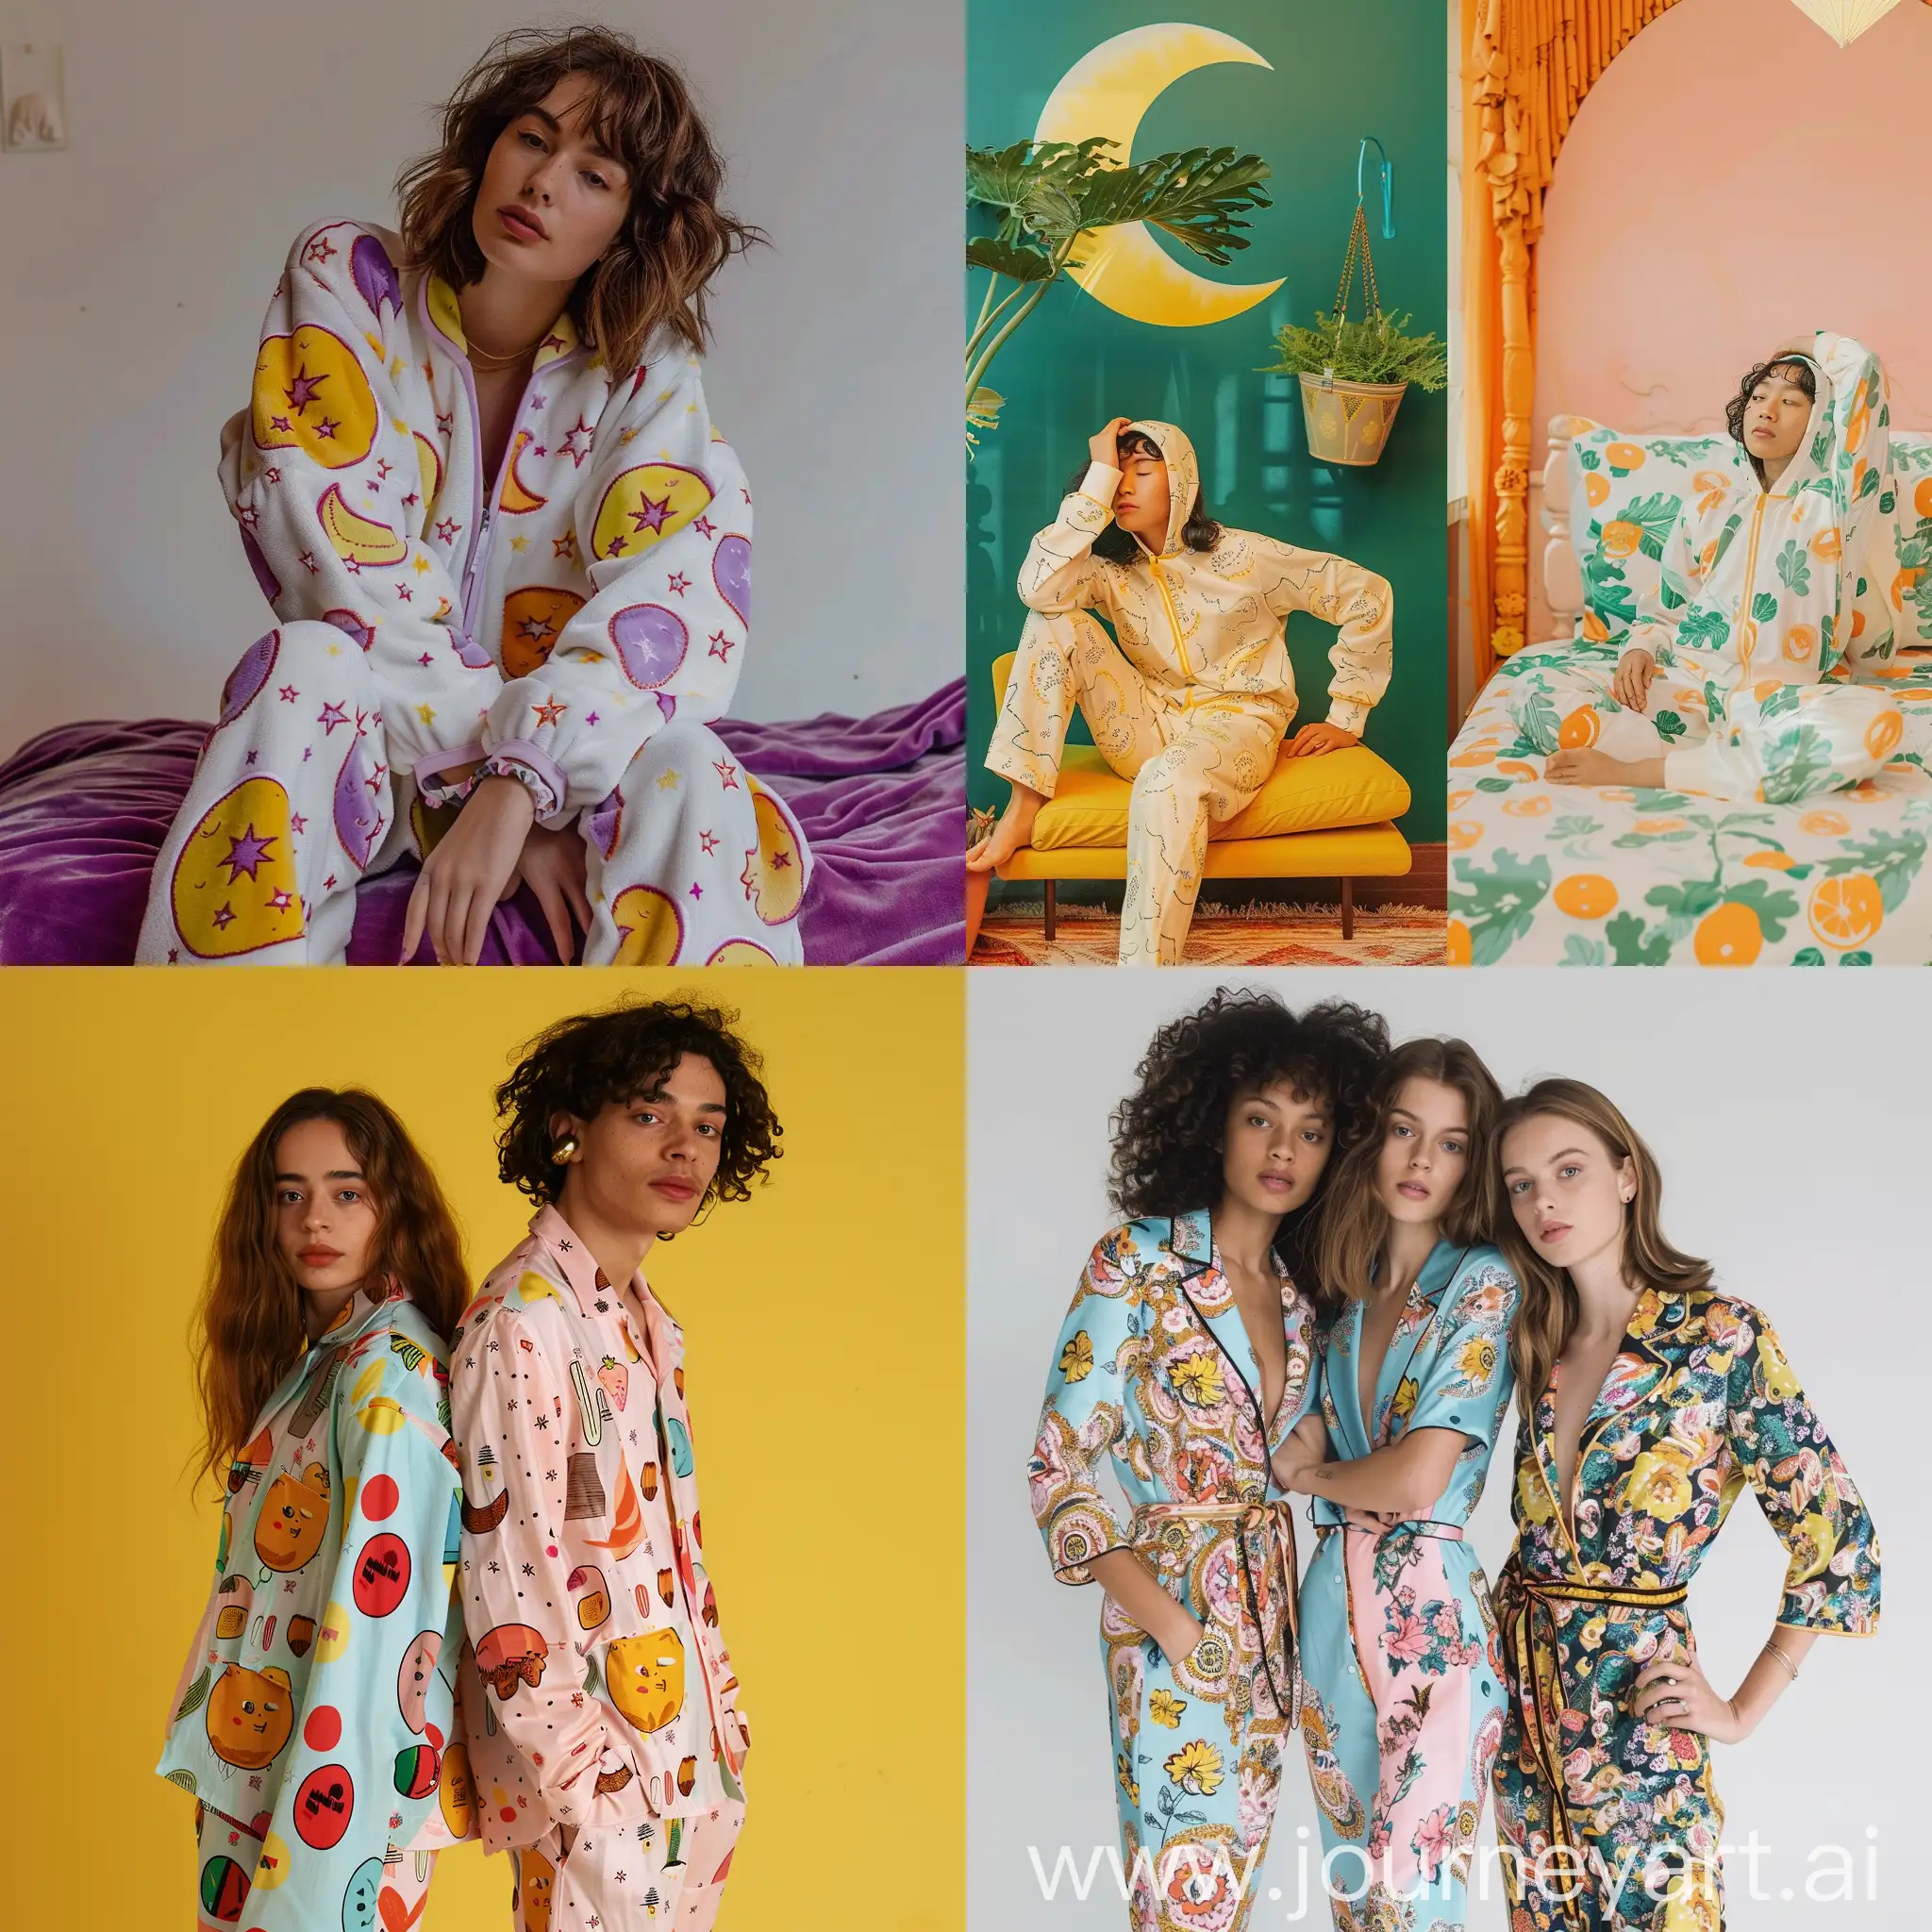 Quirky night suit designs for Gen Z
